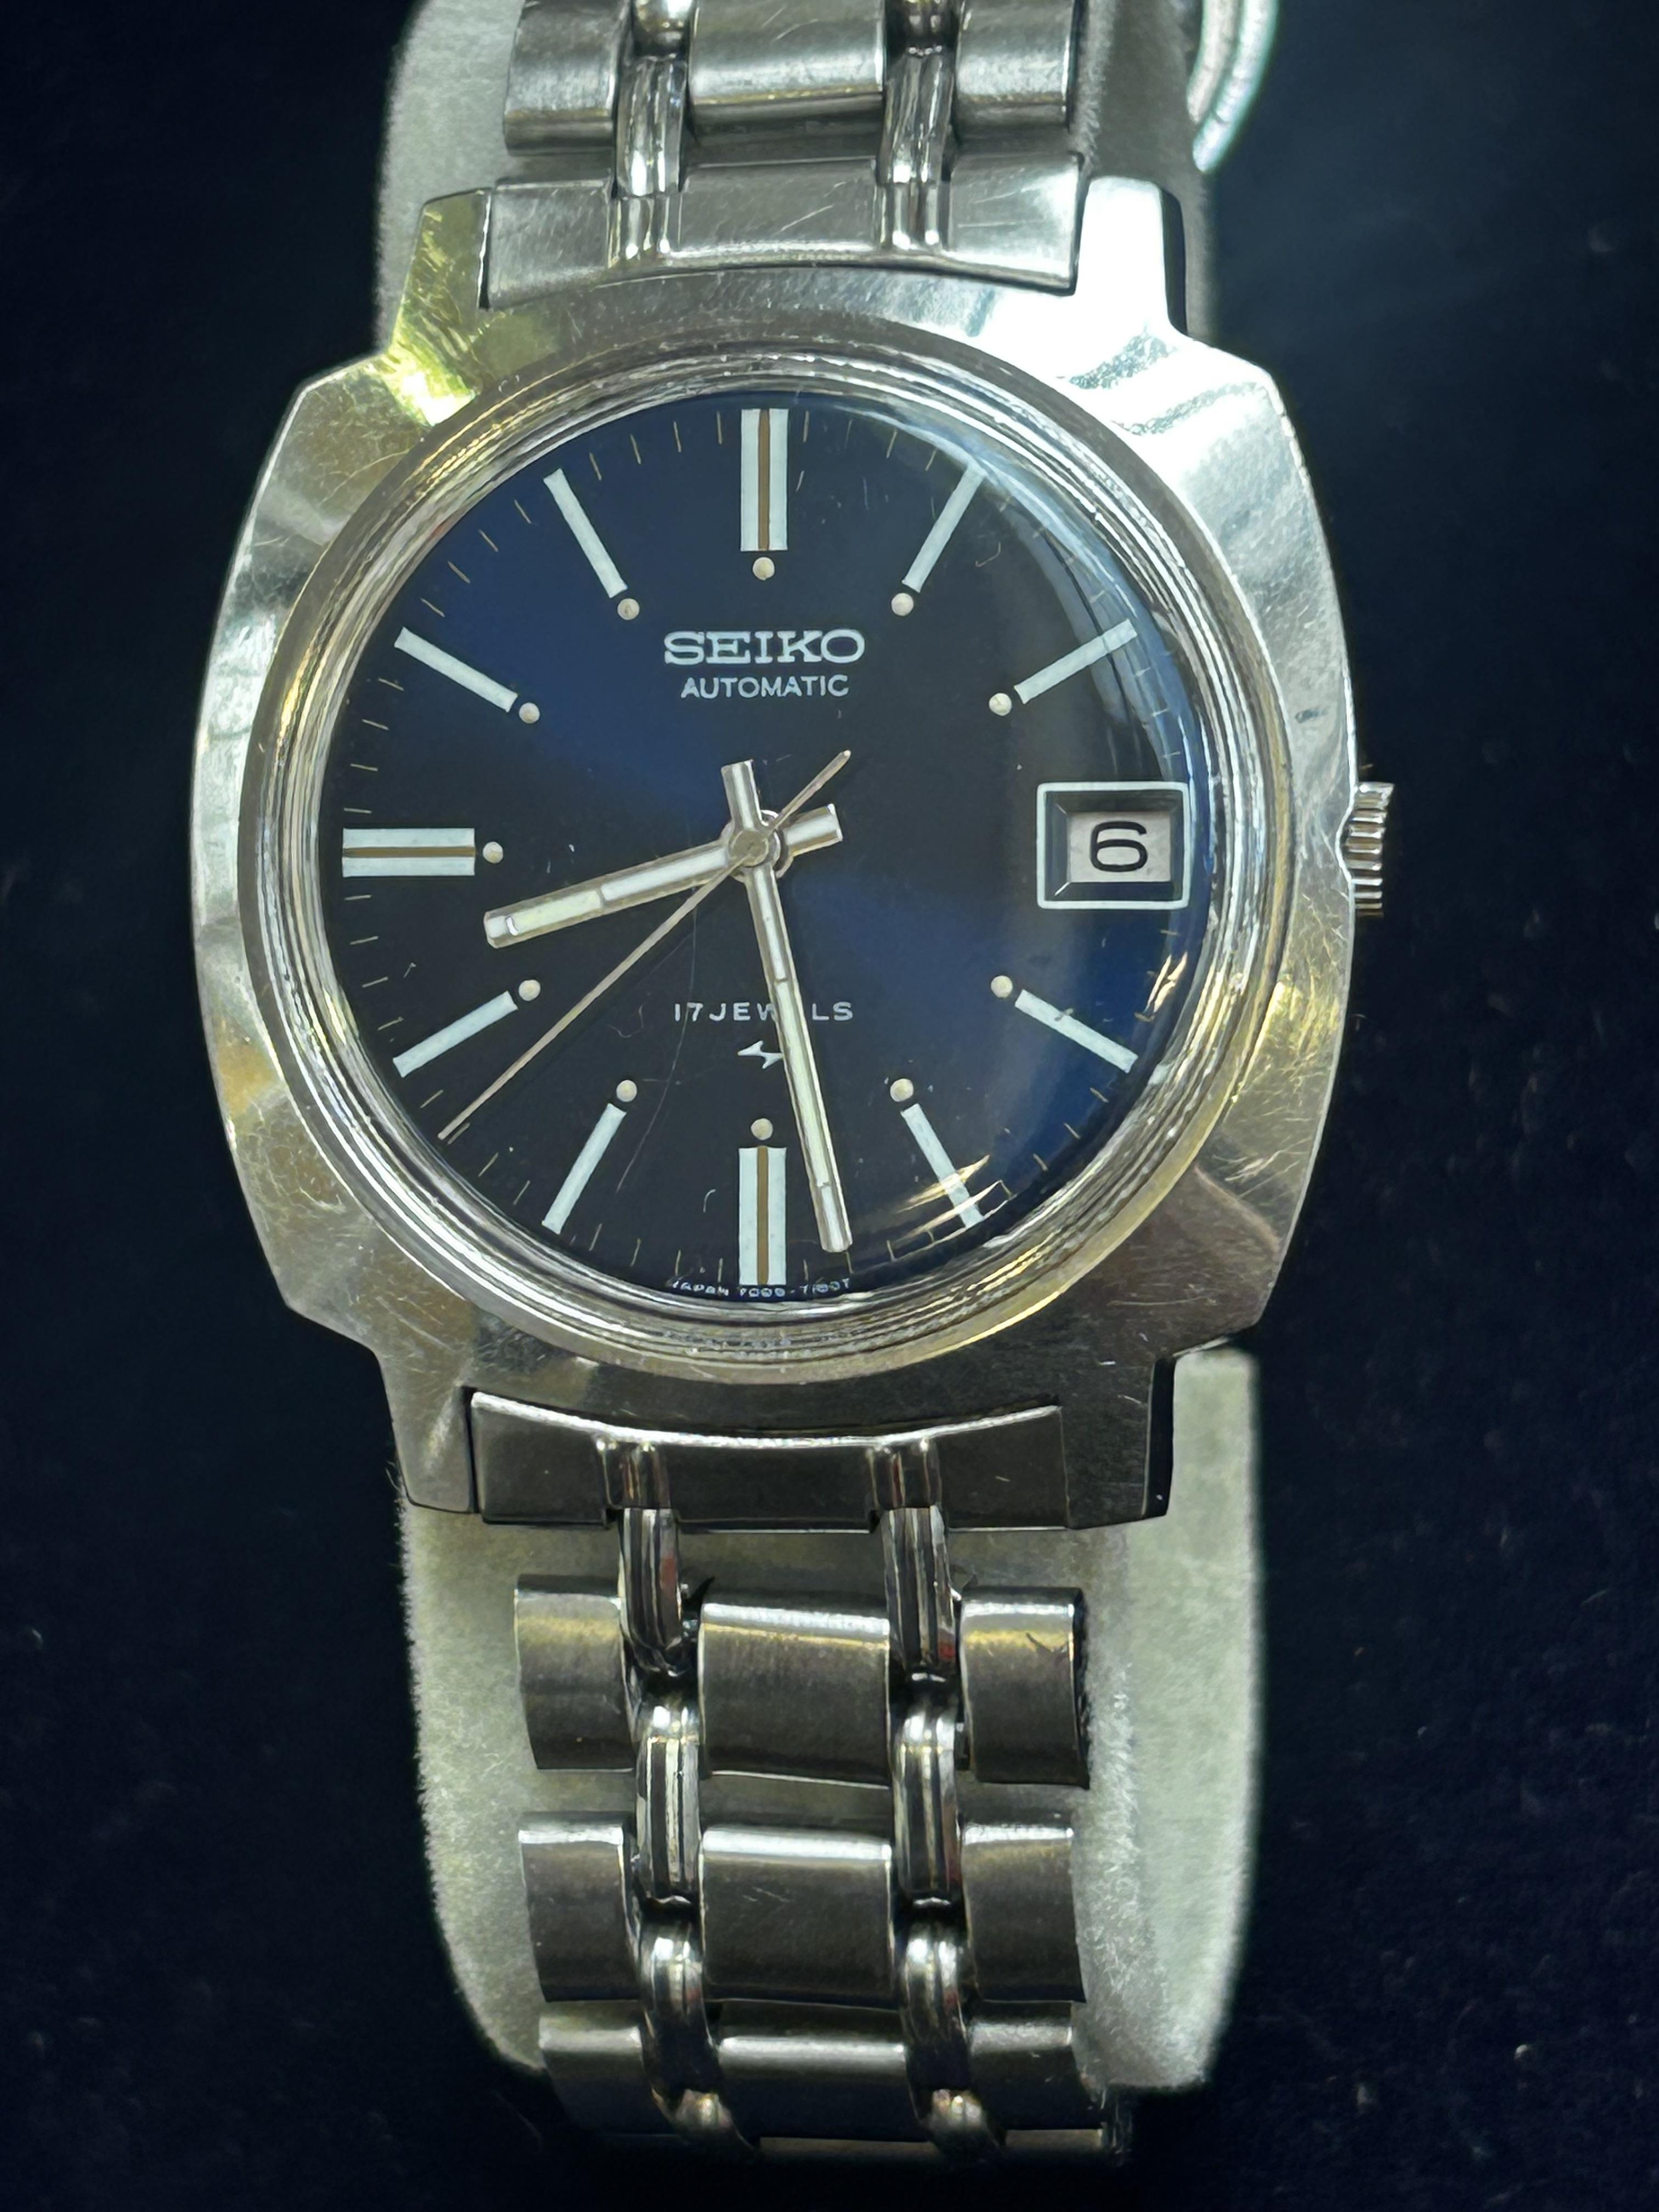 Seiko automatic blue dial wristwatch, date app at